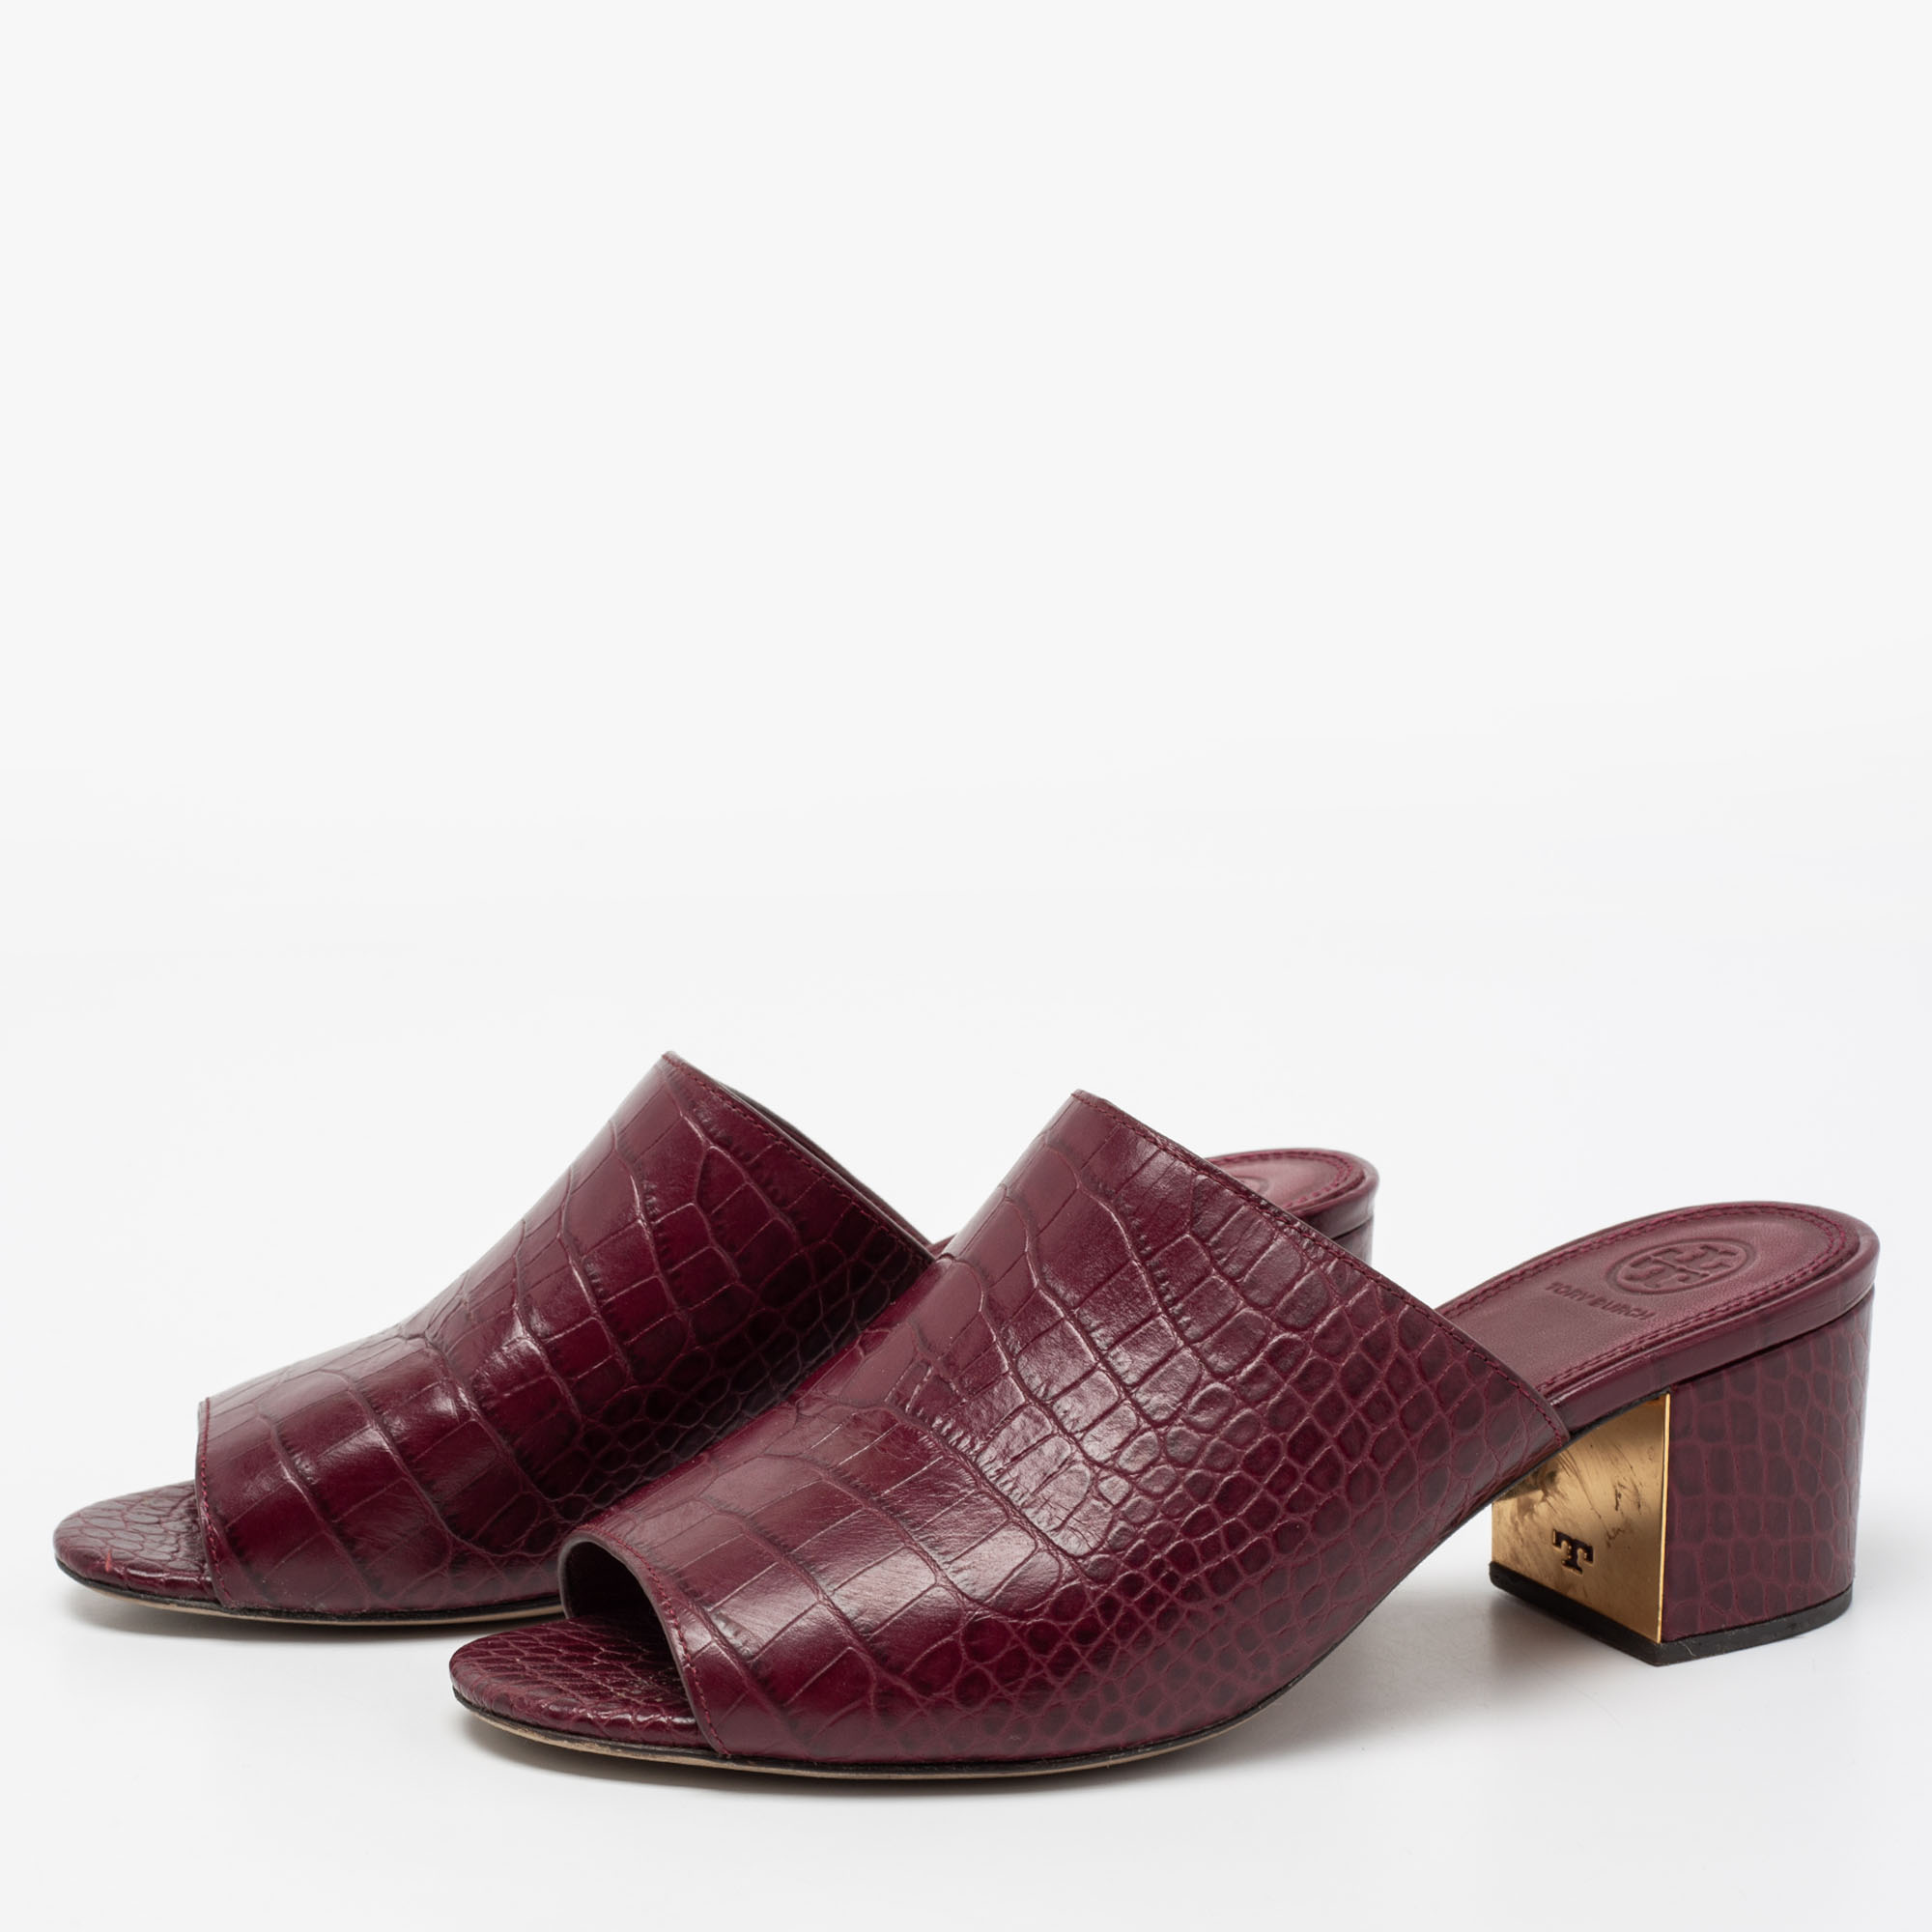 

Tory Burch Burgundy Croc Embossed Leather Salinas Open Toe Mules Size